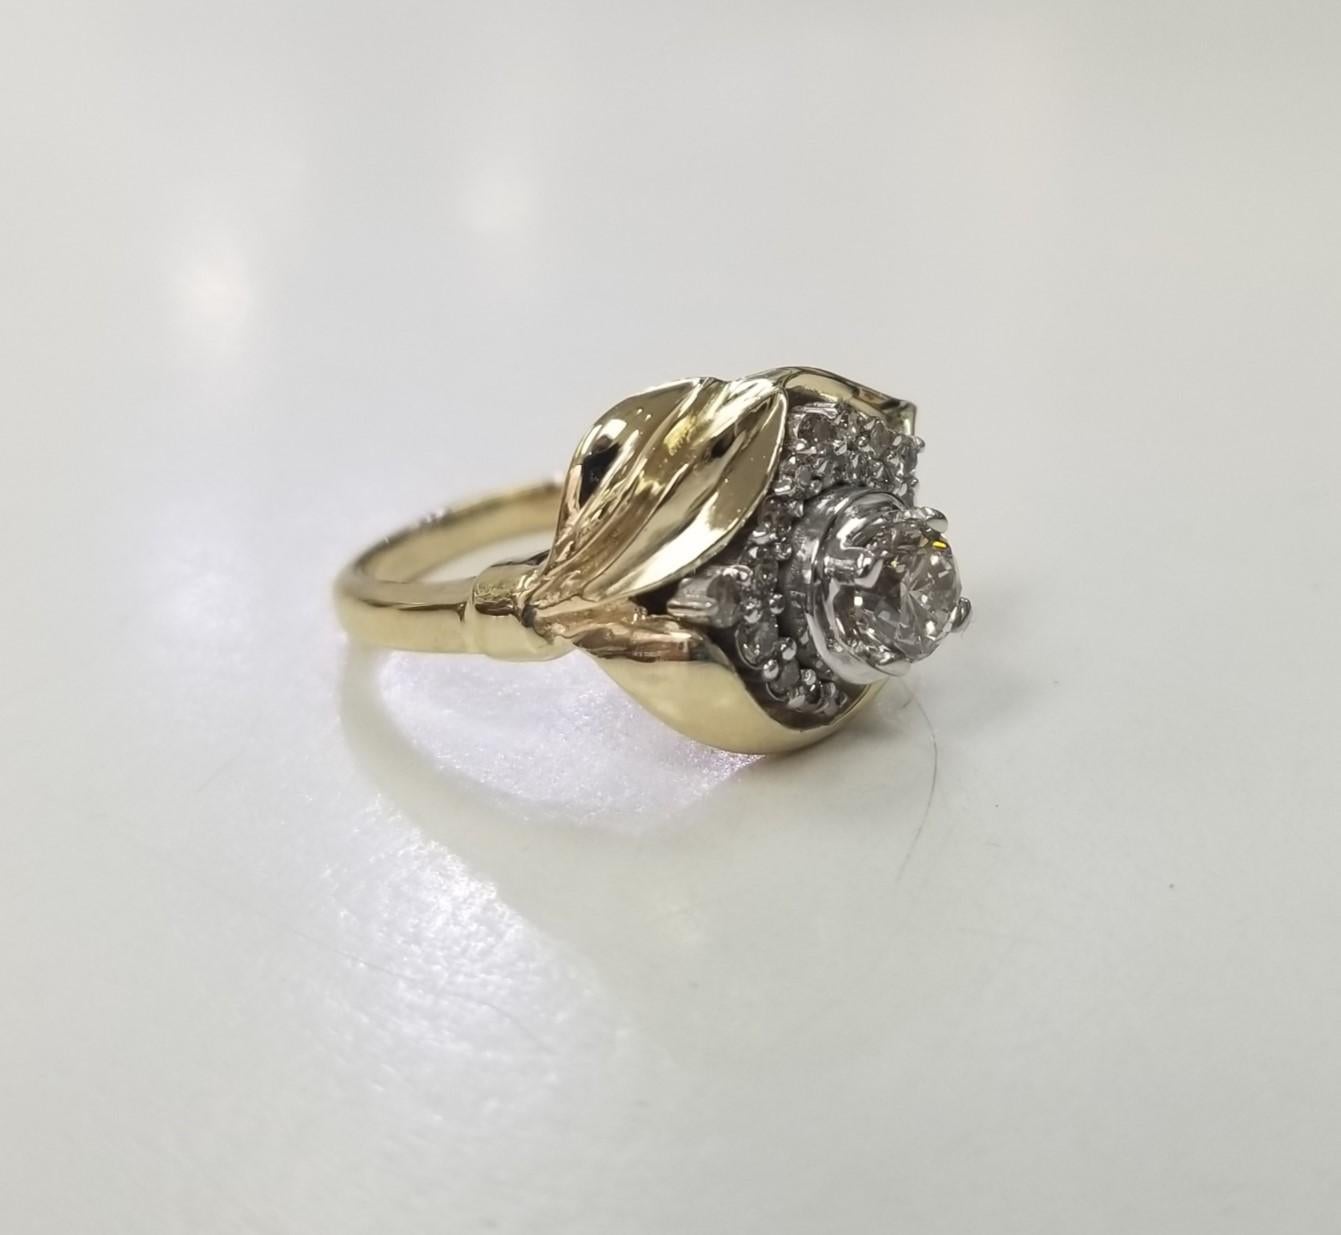 14k yellow gold ladies diamond ring containing 1 brilliant cut diamond   weight .76pts. 
Specifications:
Metal: 14K Yellow Gold
Weight: 5.8 Gr
Center stone: 0.48 pts. Round Cut 
Side Stones: 0.28 pts. Diamonds
Size: 6 US